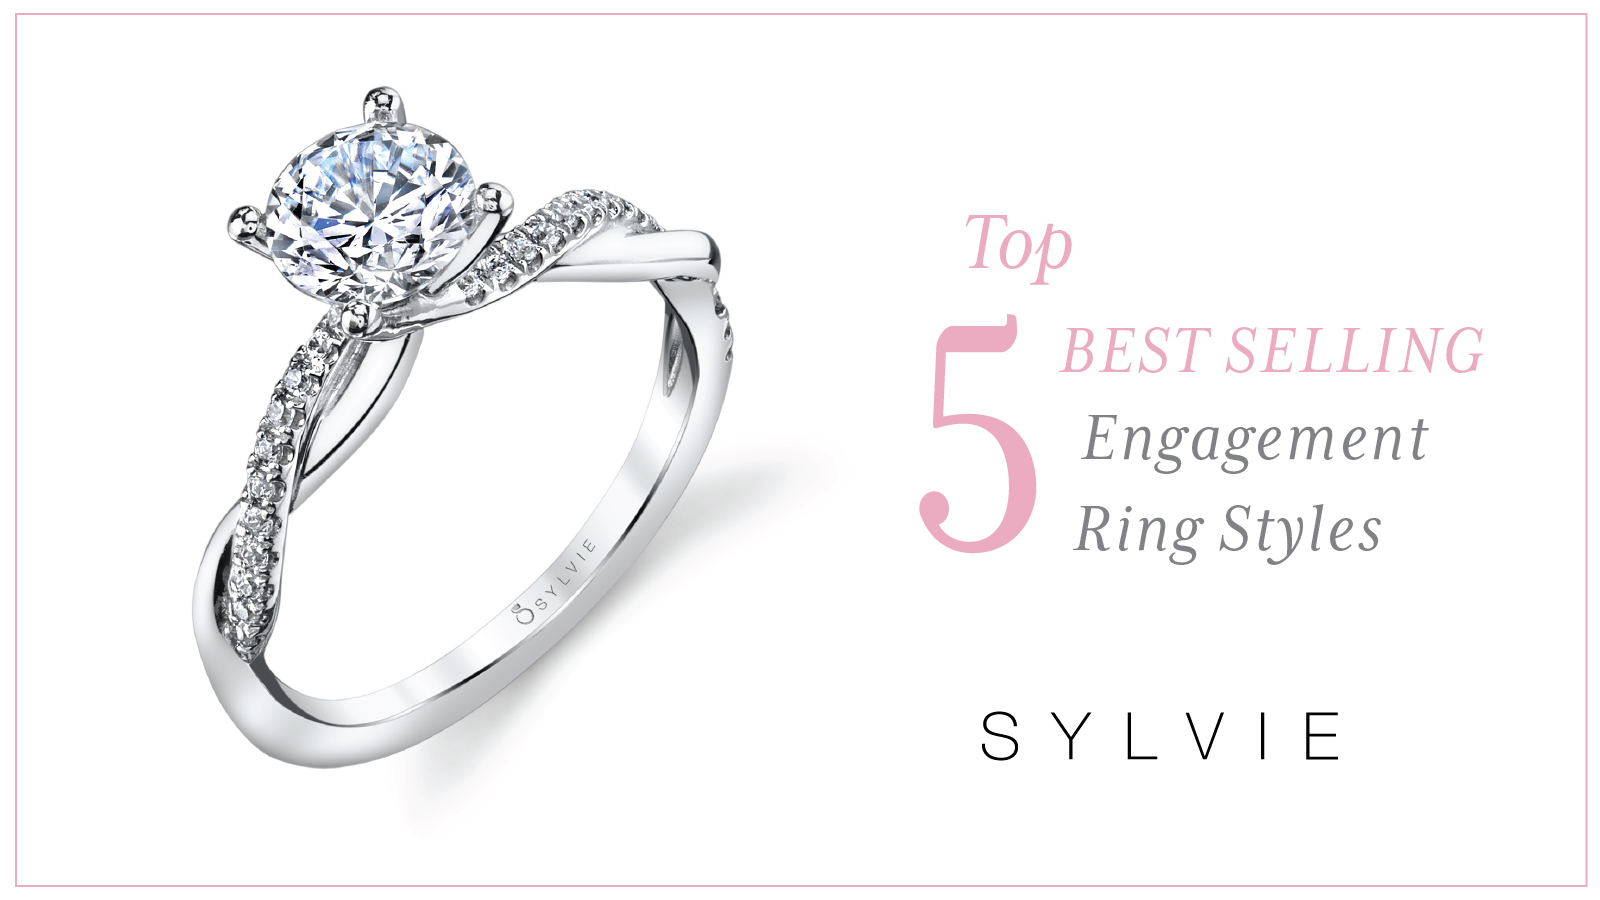 The Top Engagement Ring Styles For 2021 | Engagement Ring Style Trends